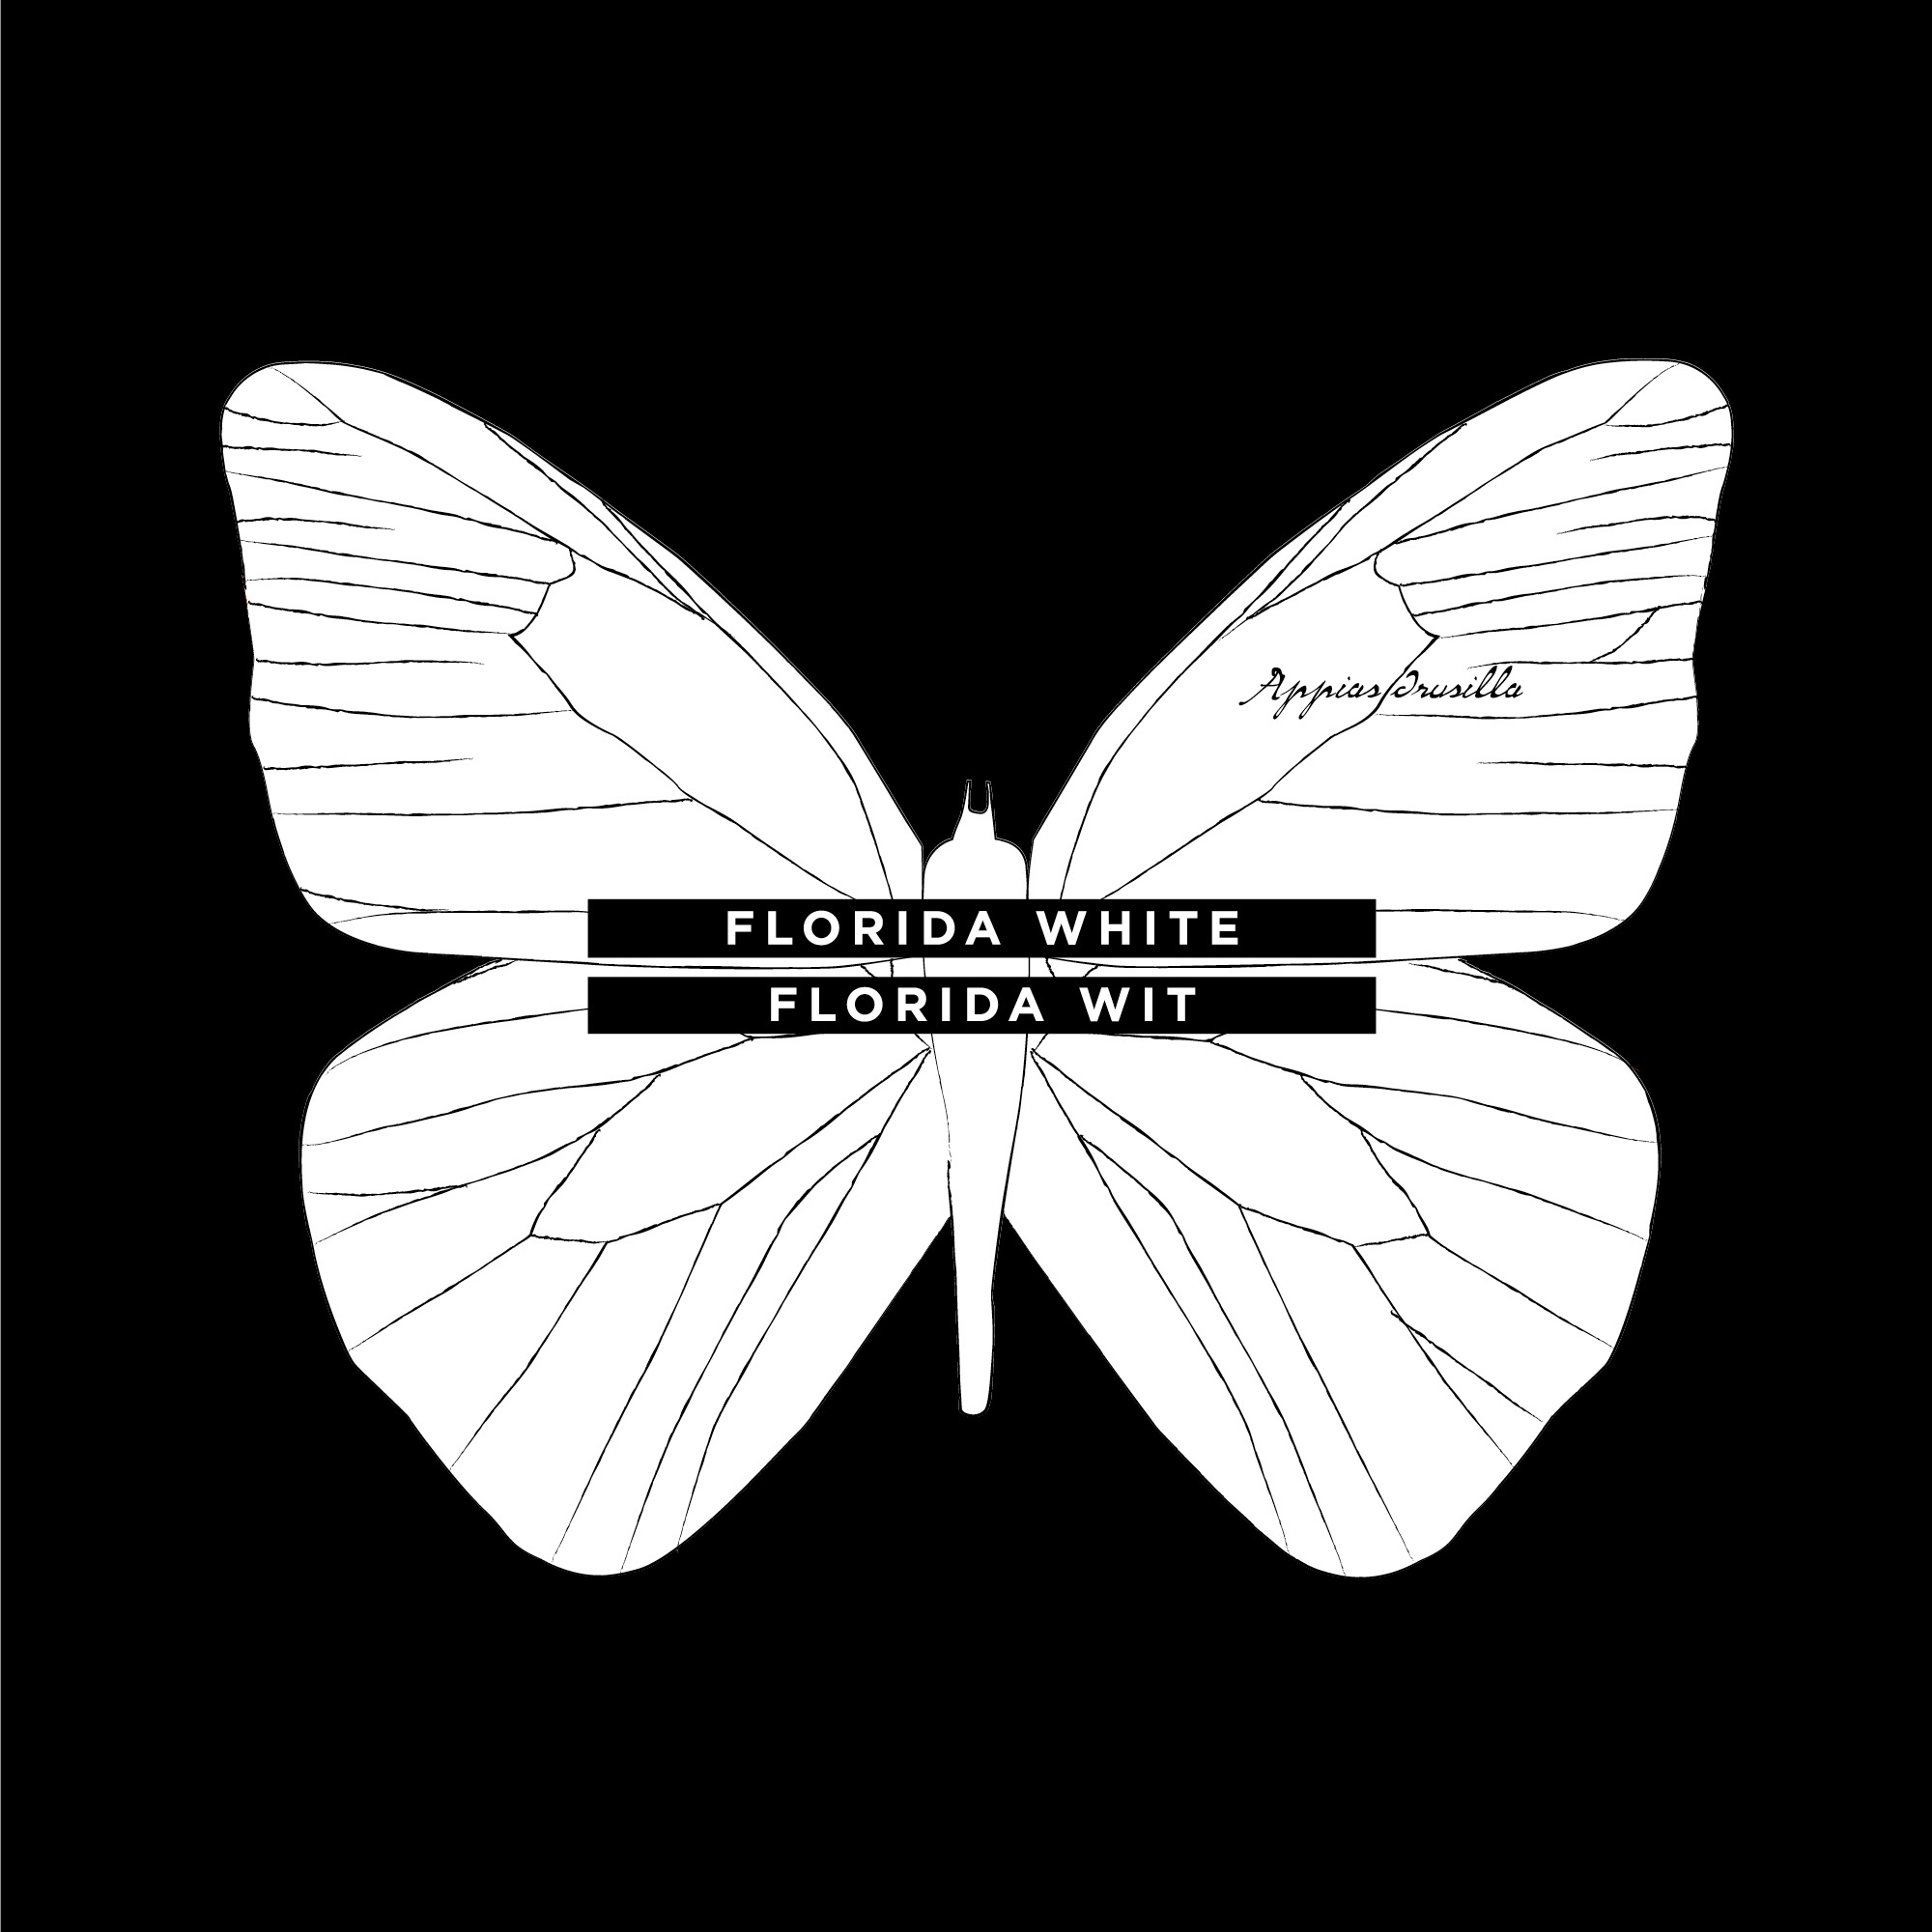 Florida White Florida Wit logo. A white line drawing of a butterfly set against a black background.